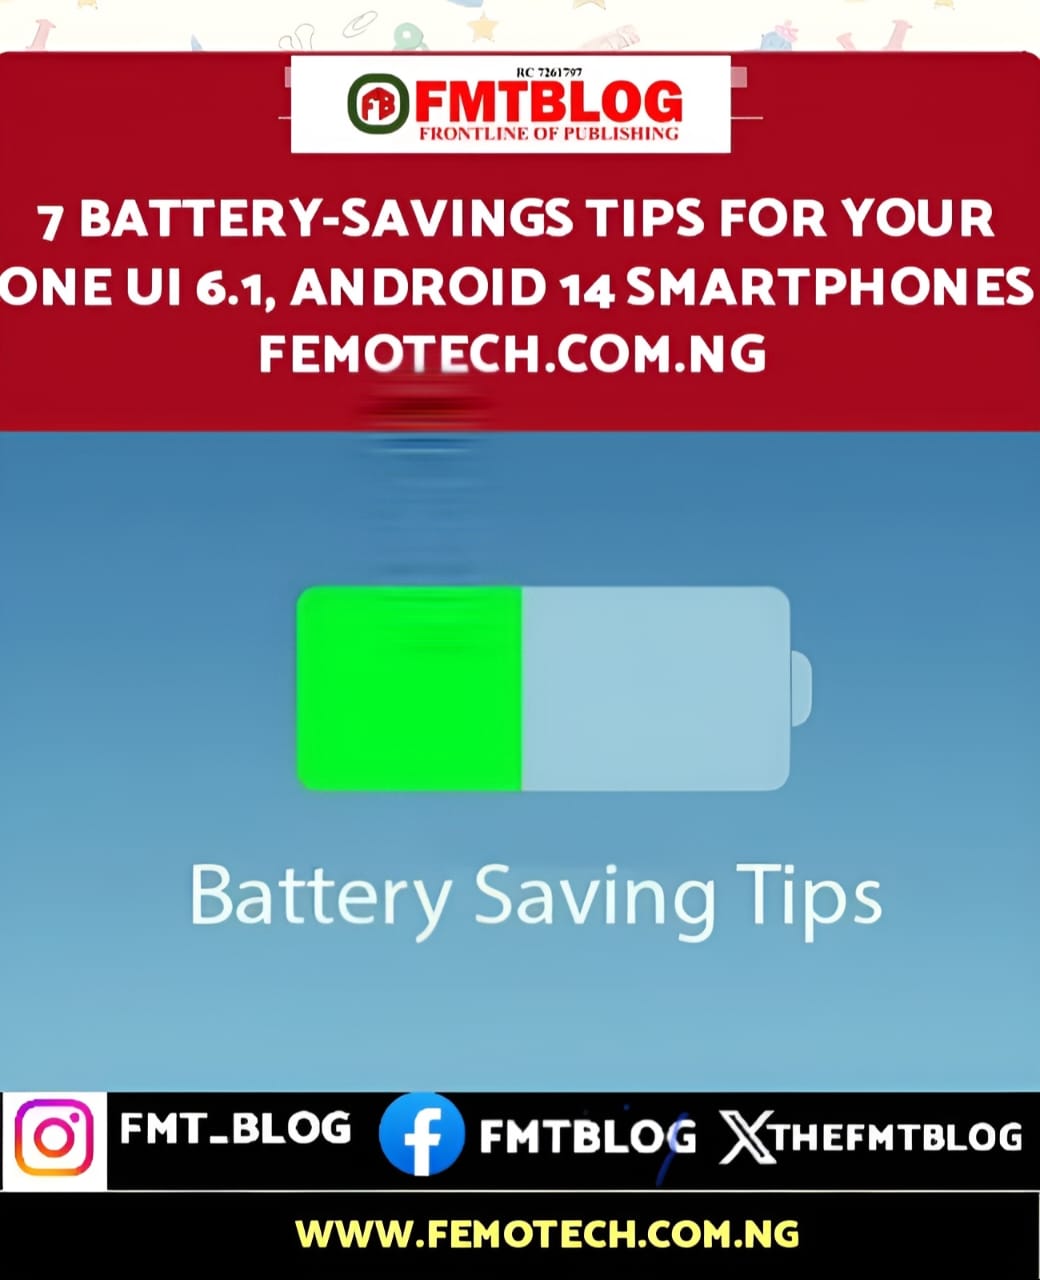 7 Battery-Savings Tips For Your ONE UI 6.1, Android 14 Smartphones